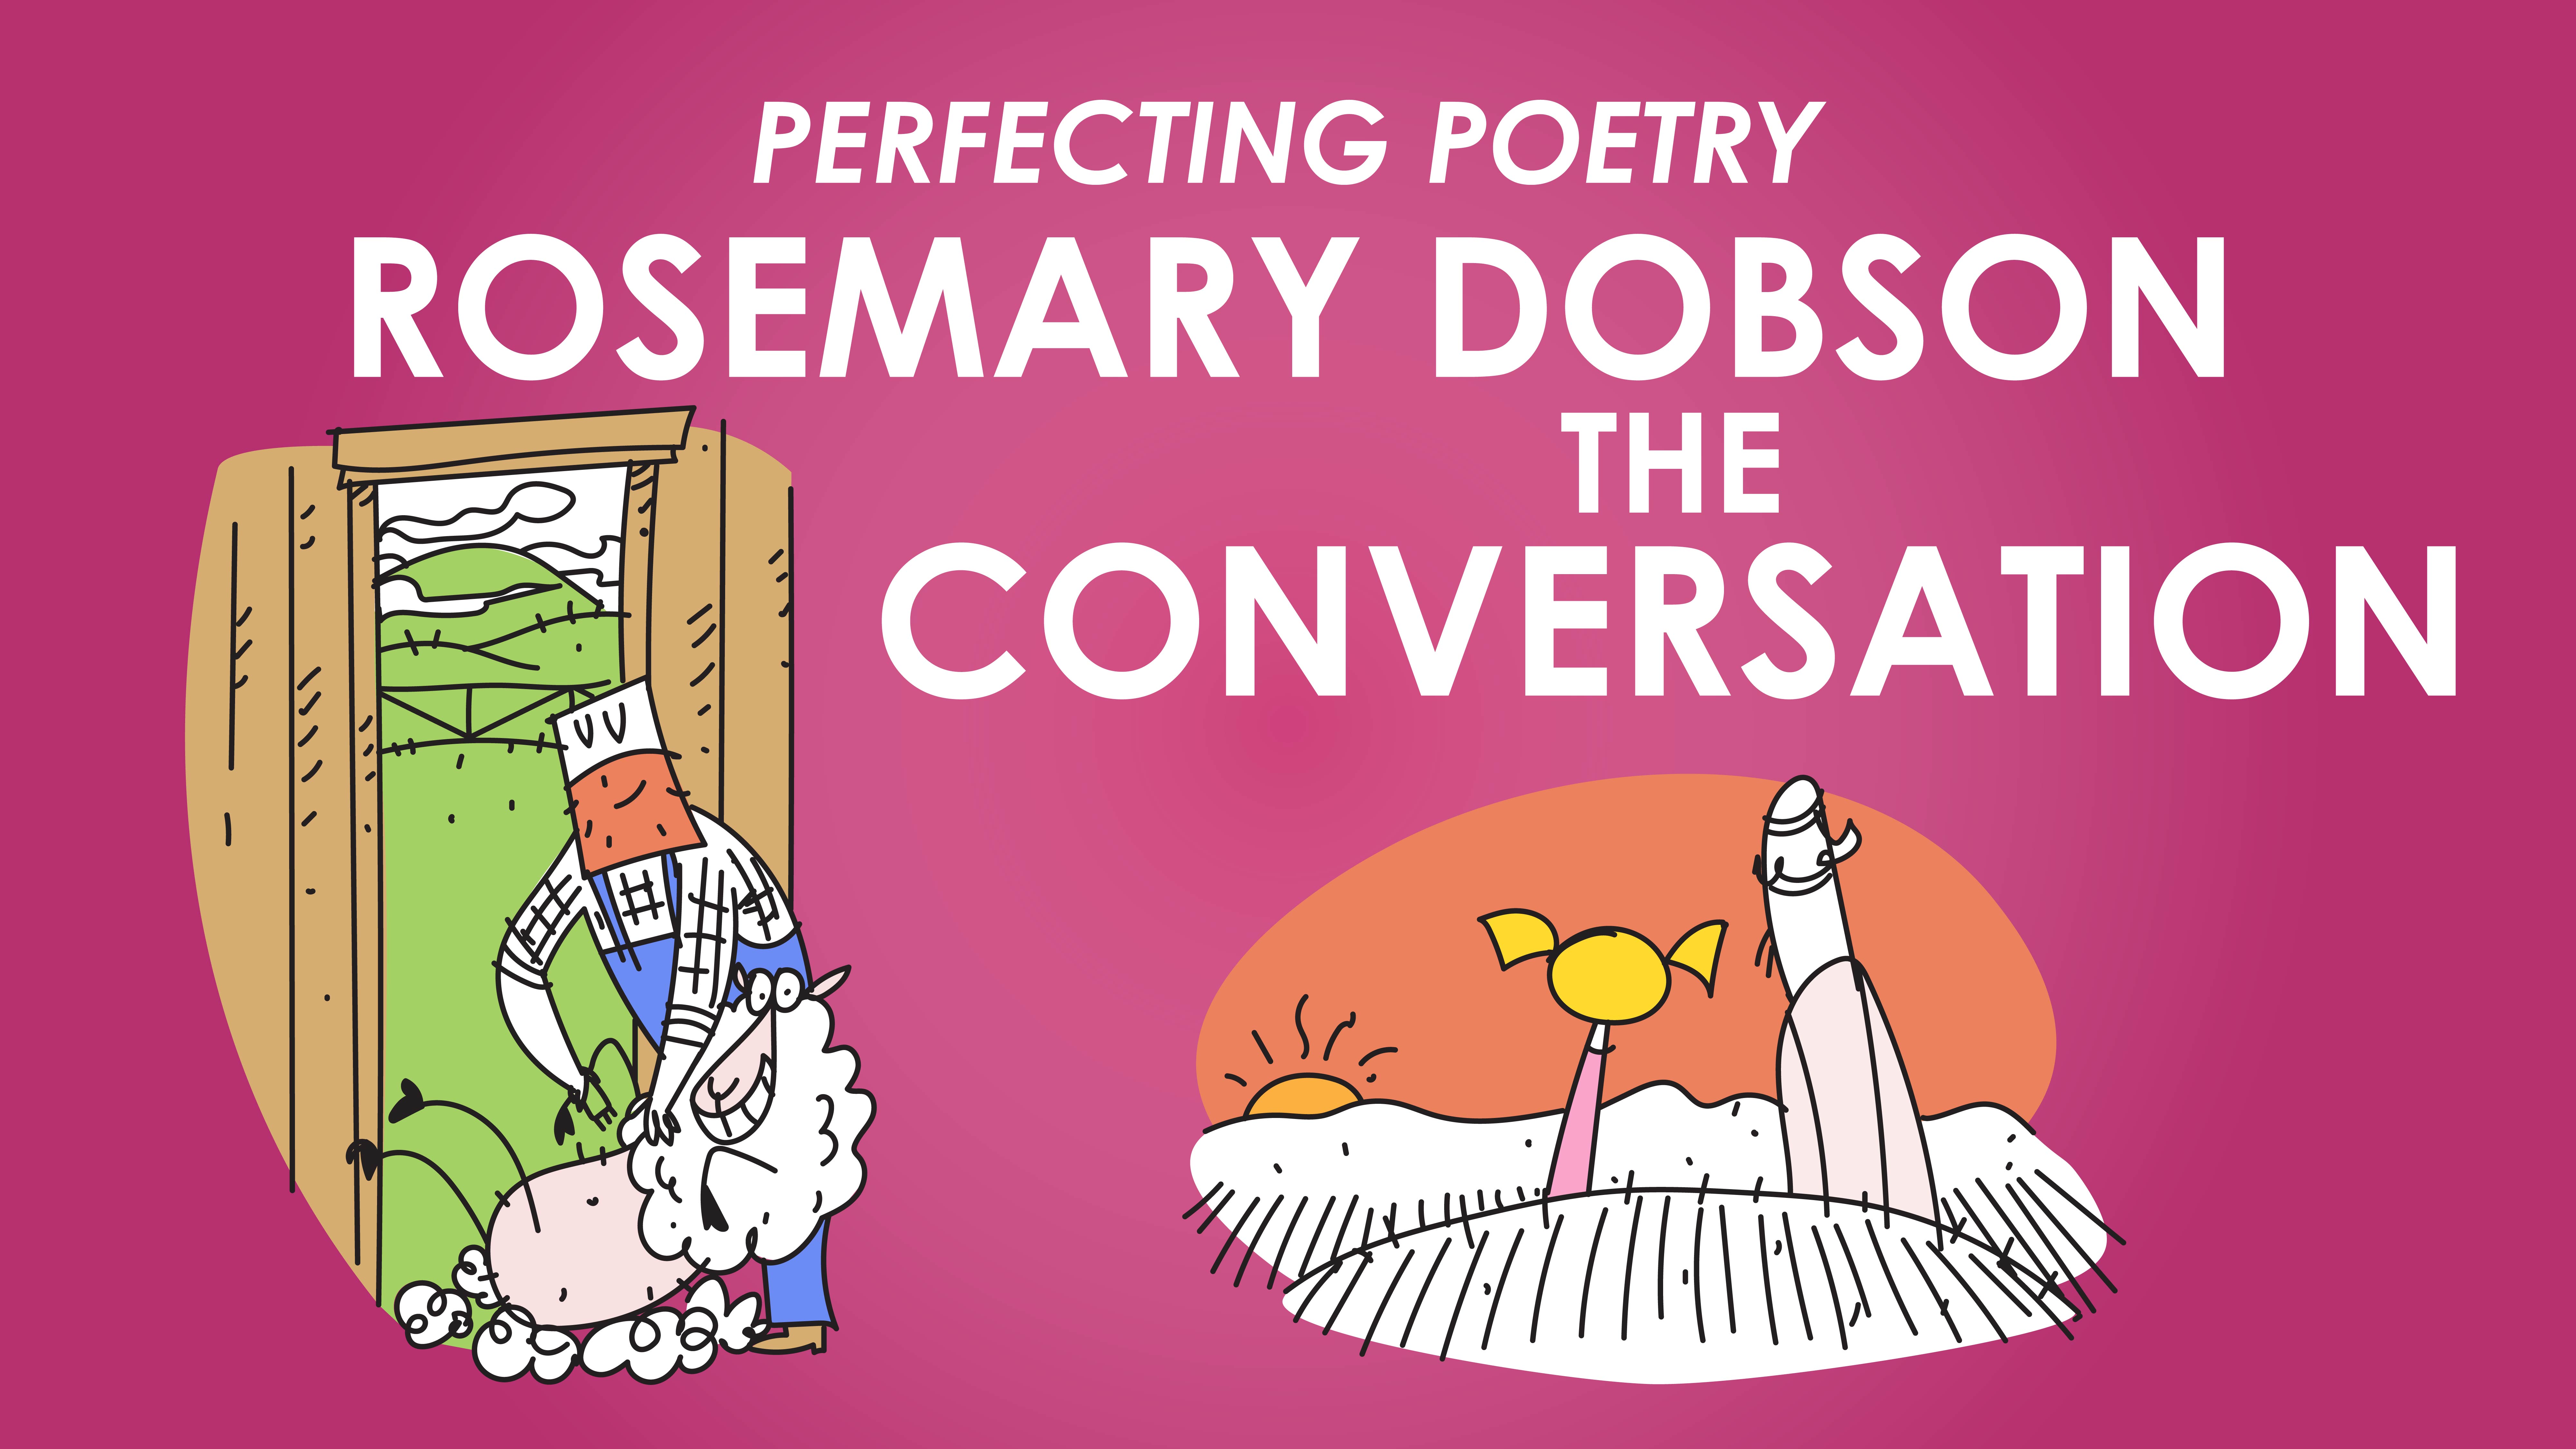 The Conversation - Rosemary Dobson - Perfecting Poetry